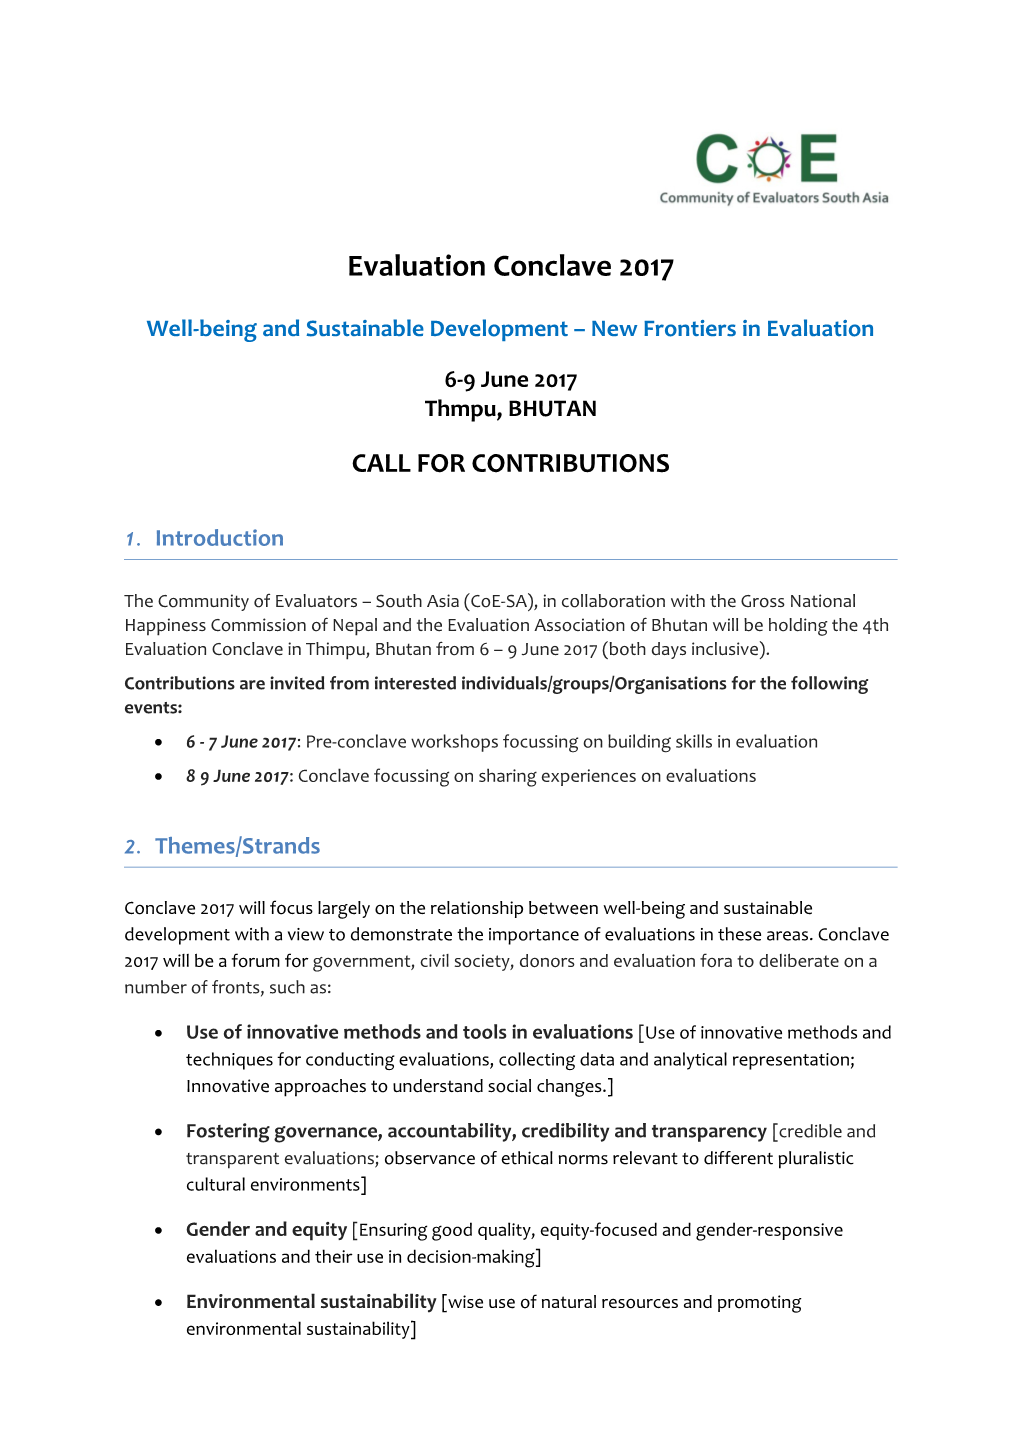 Well-Being and Sustainable Development New Frontiers in Evaluation